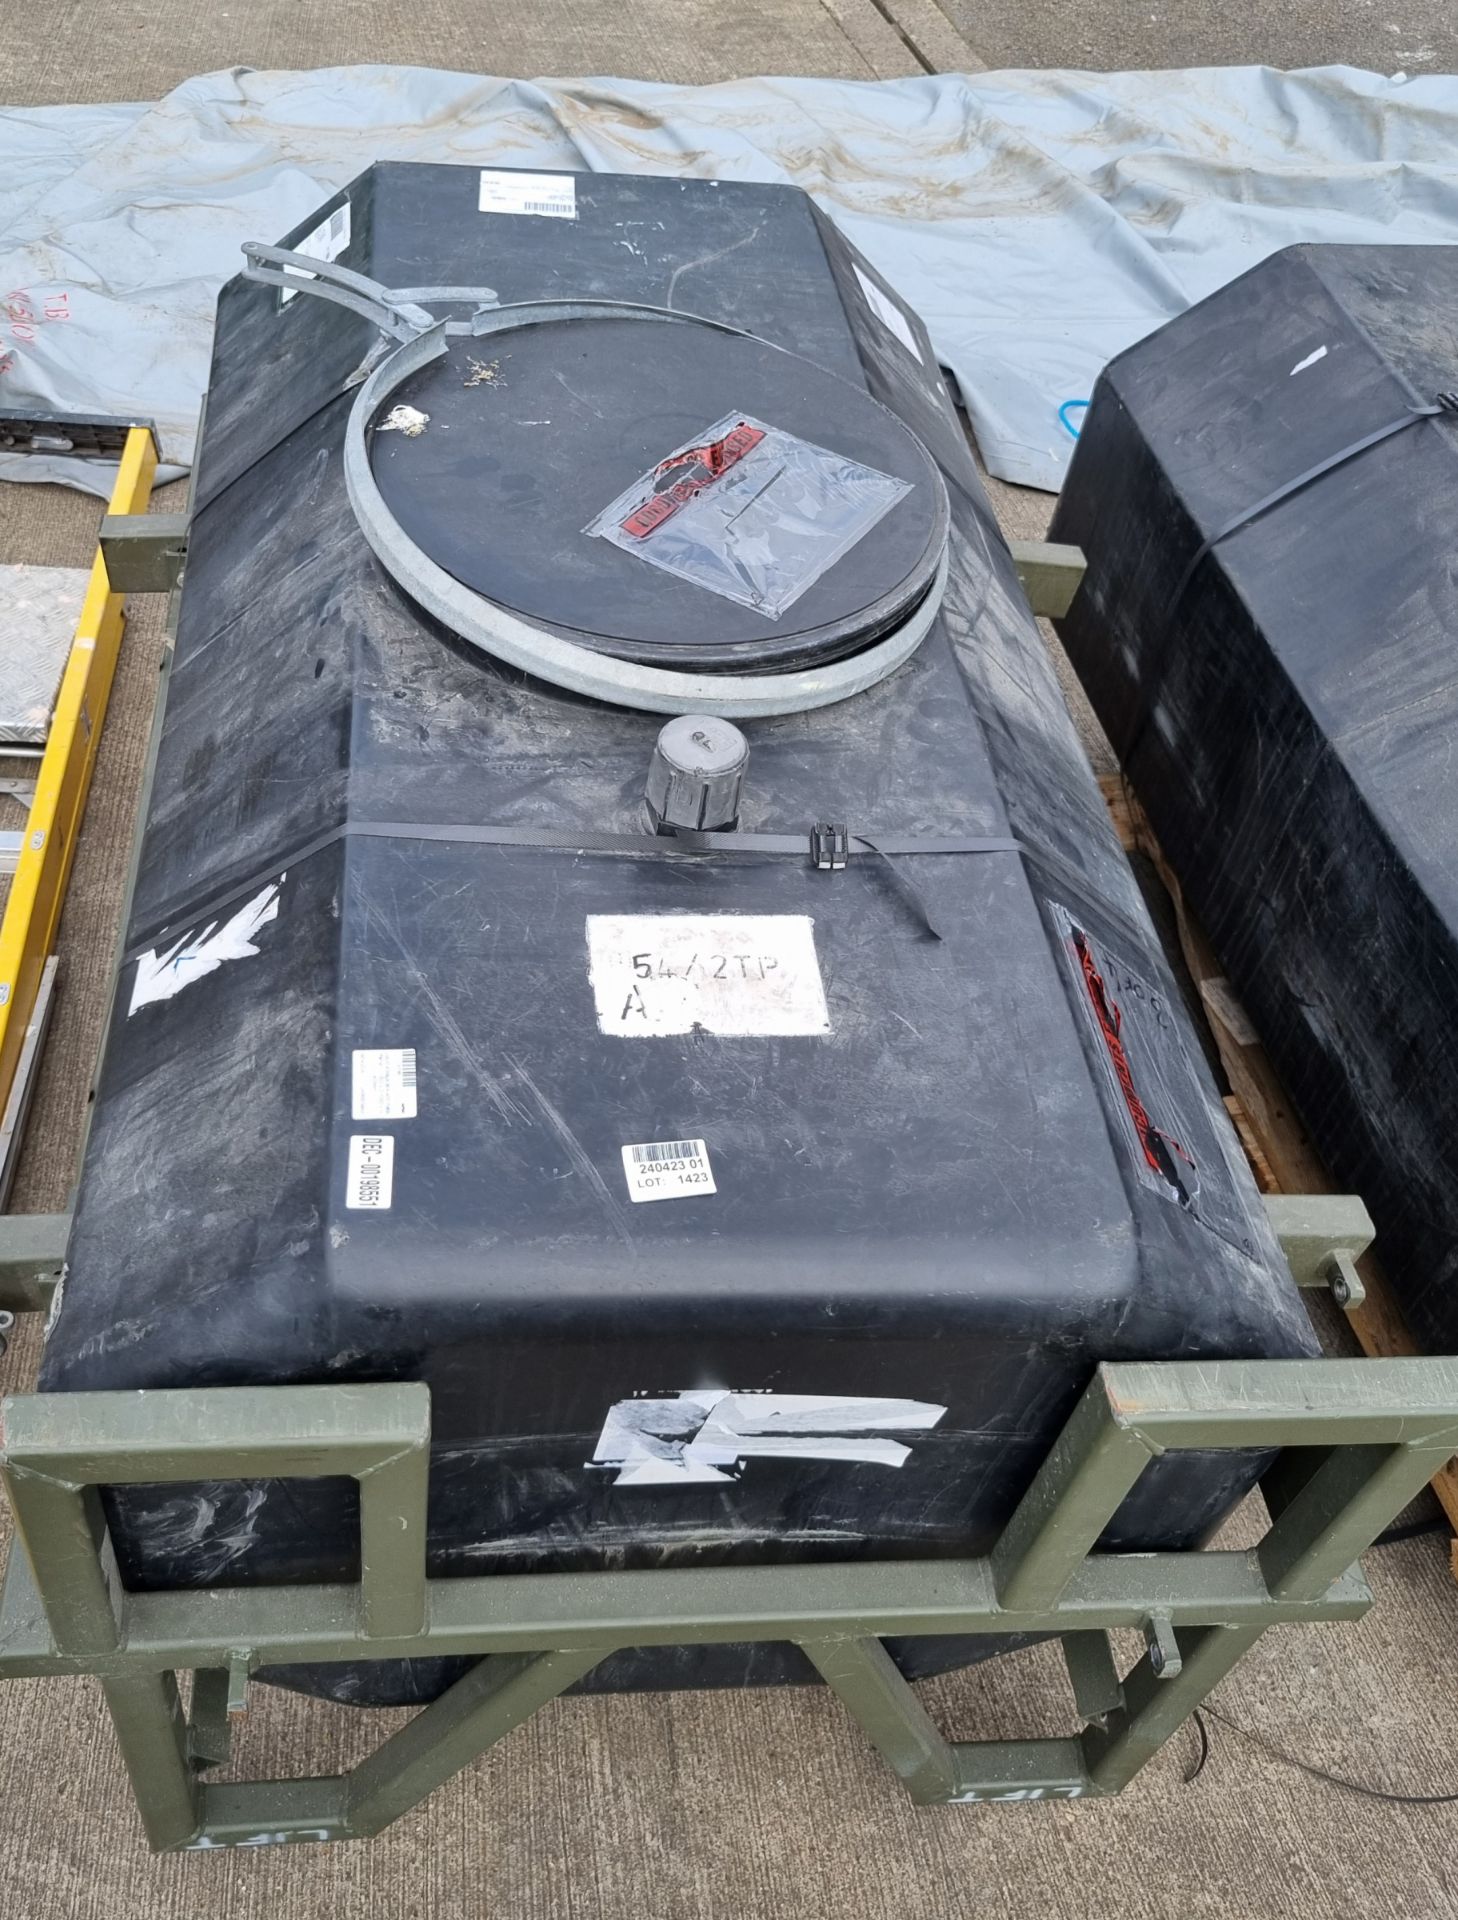 Mobile water storage tank with metal frame - L 1500 x D 1000 x H 800mm - Image 2 of 4